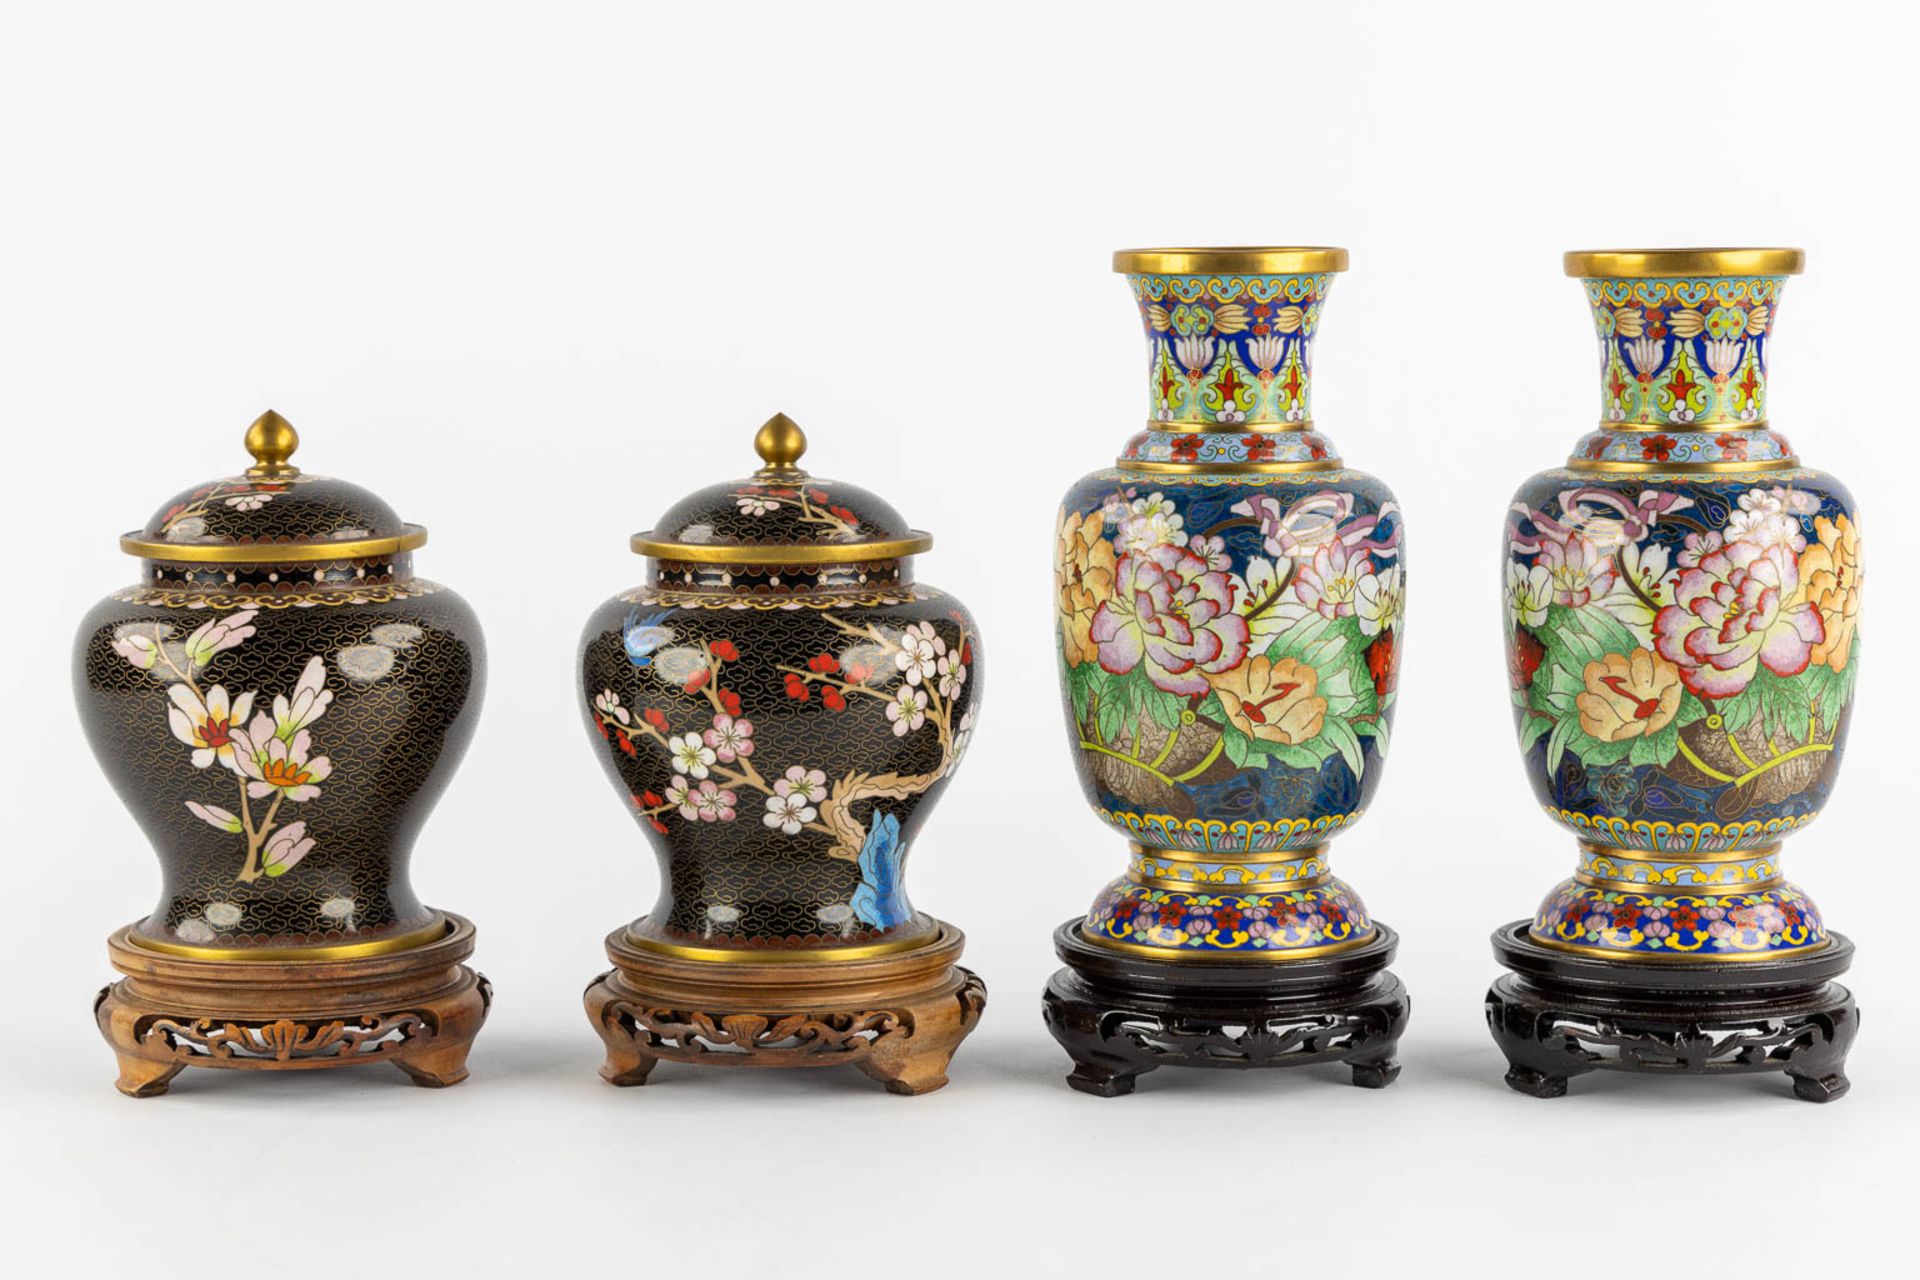 Twelve pieces of Cloisonné enamelled vases and trinklet bowls. Three pairs. (H:23 cm) - Image 12 of 14